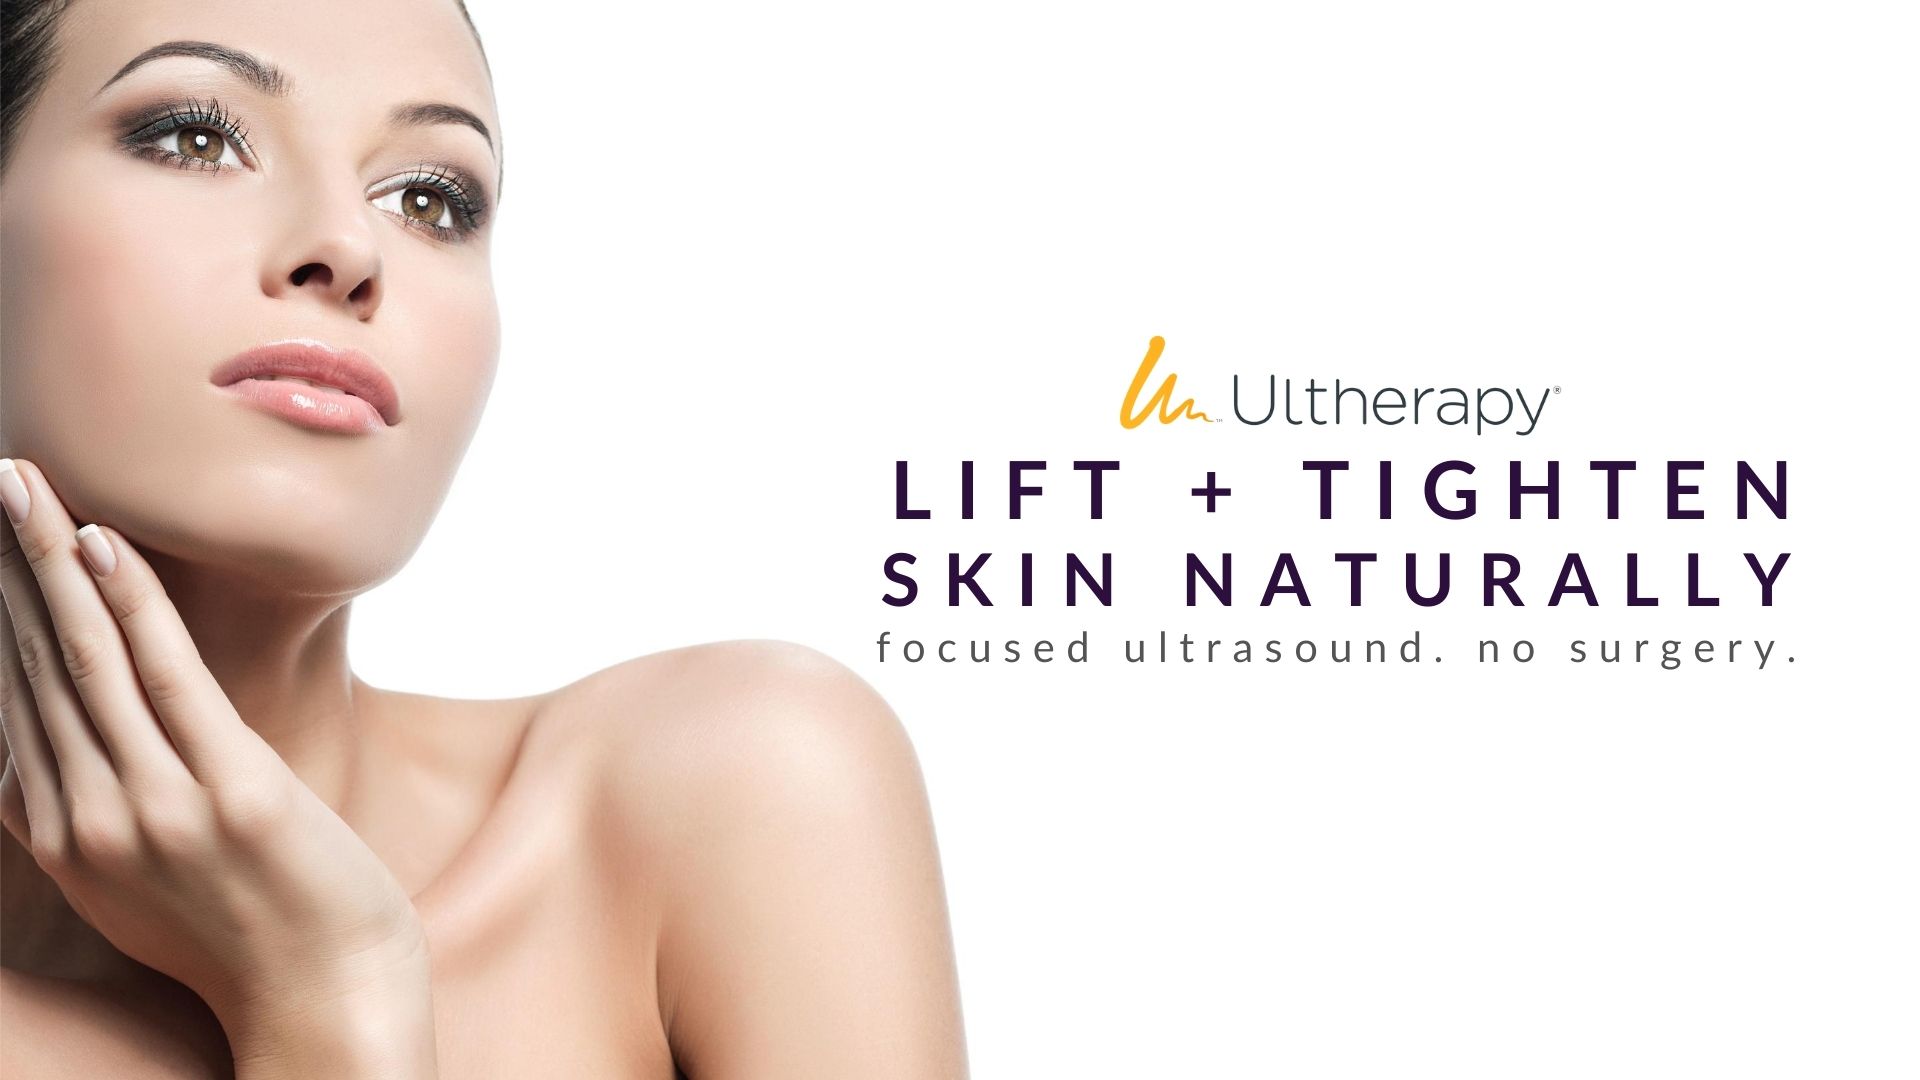 Woman touches her lifted + tightened skin with natural looking results from ultherapy treatment at advanced rejuvenation centers.